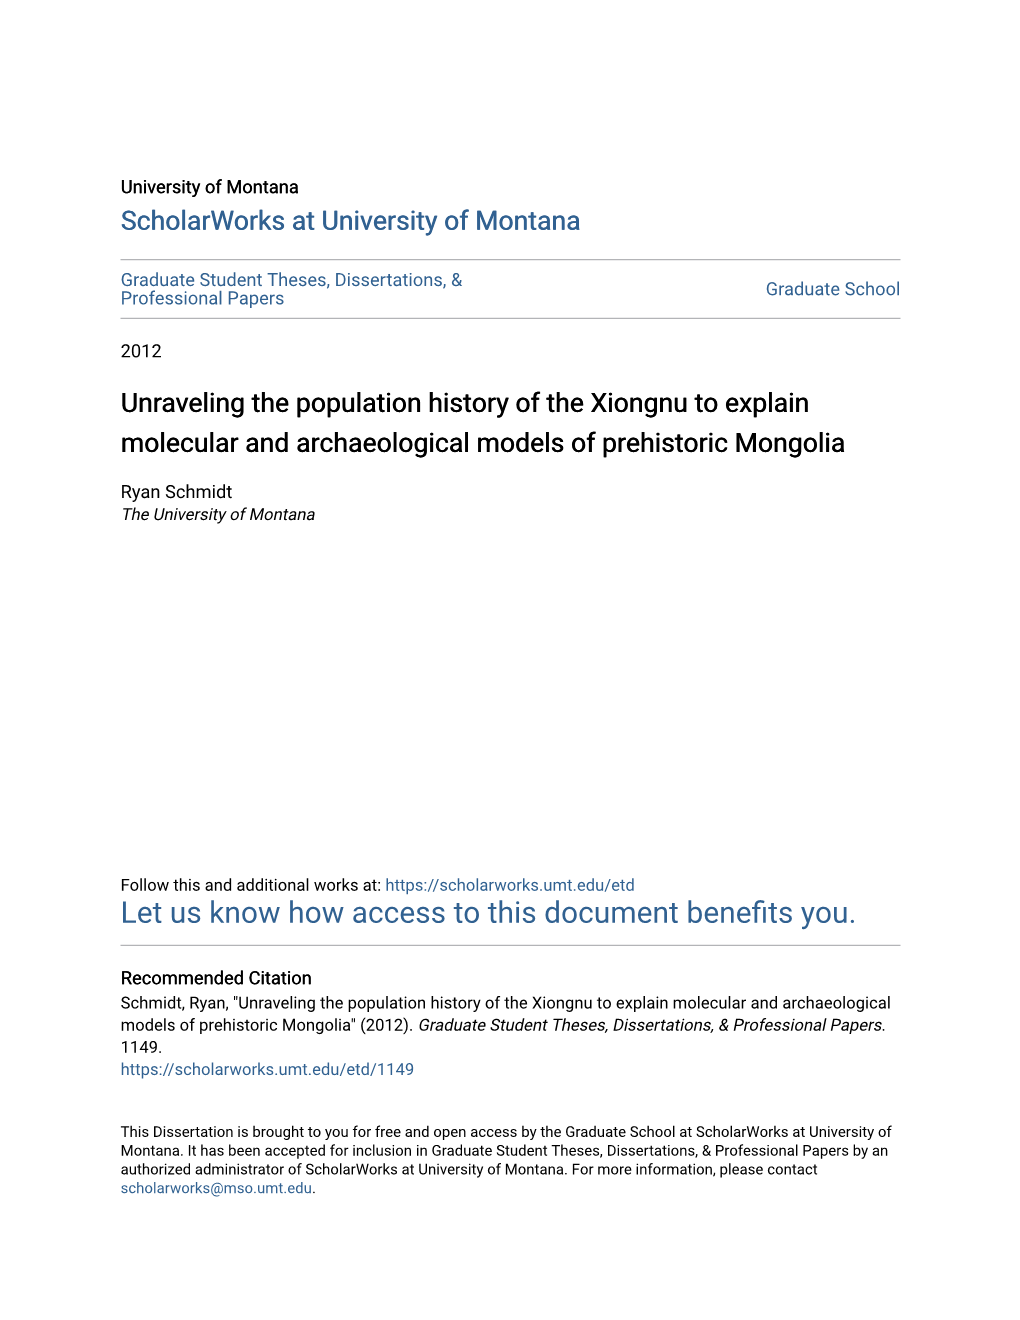 Unraveling the Population History of the Xiongnu to Explain Molecular and Archaeological Models of Prehistoric Mongolia